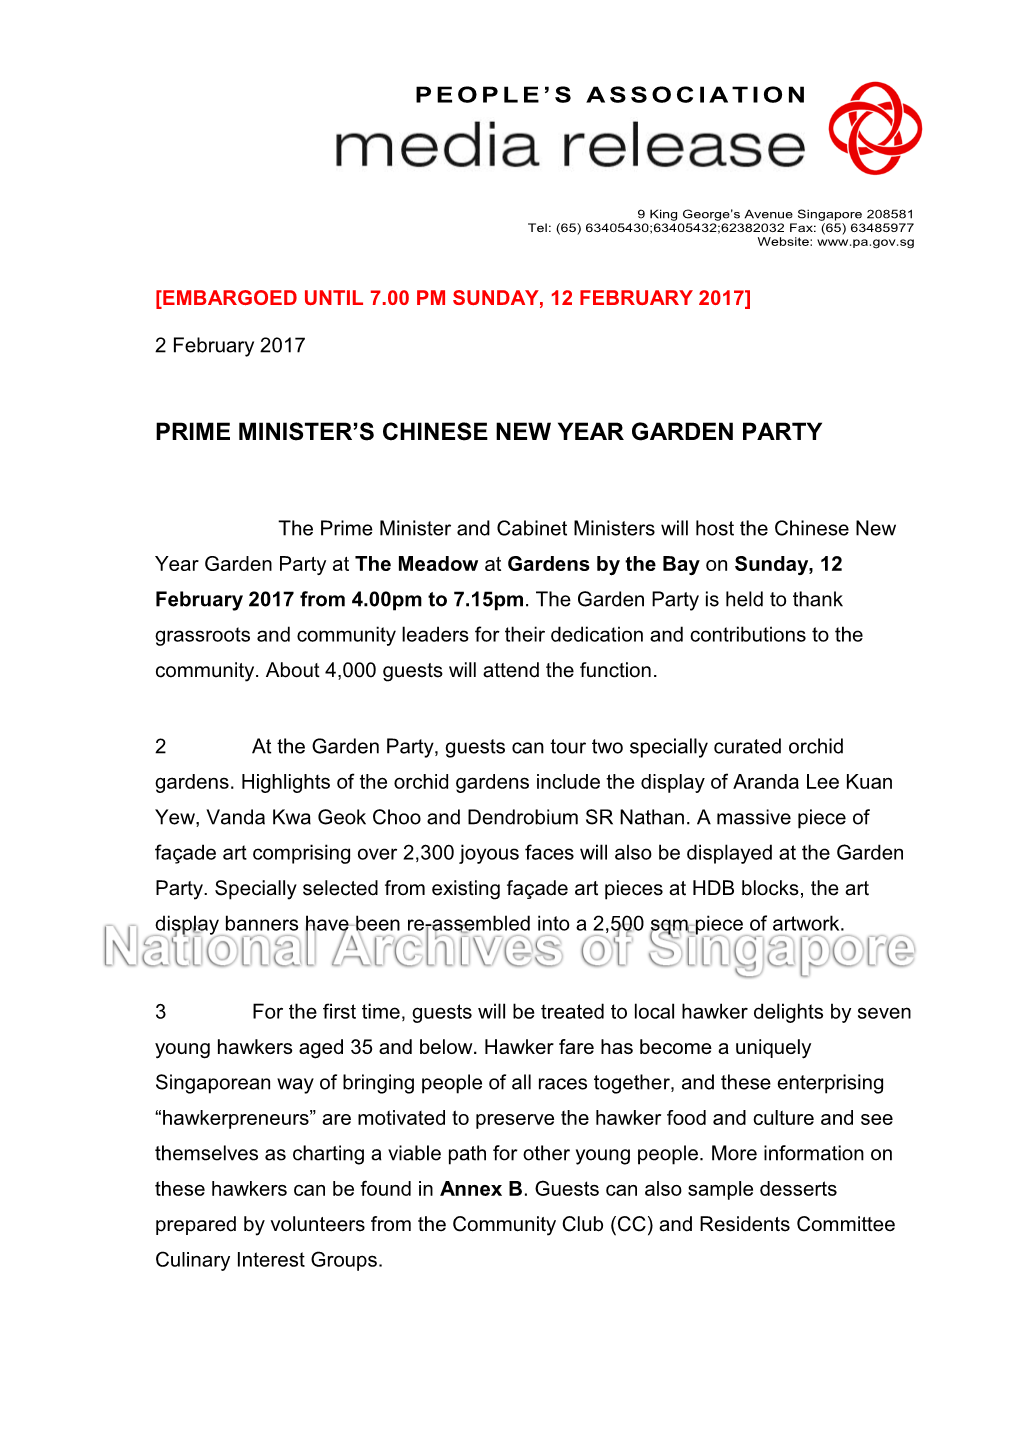 Prime Minister's Chinese New Year Garden Party